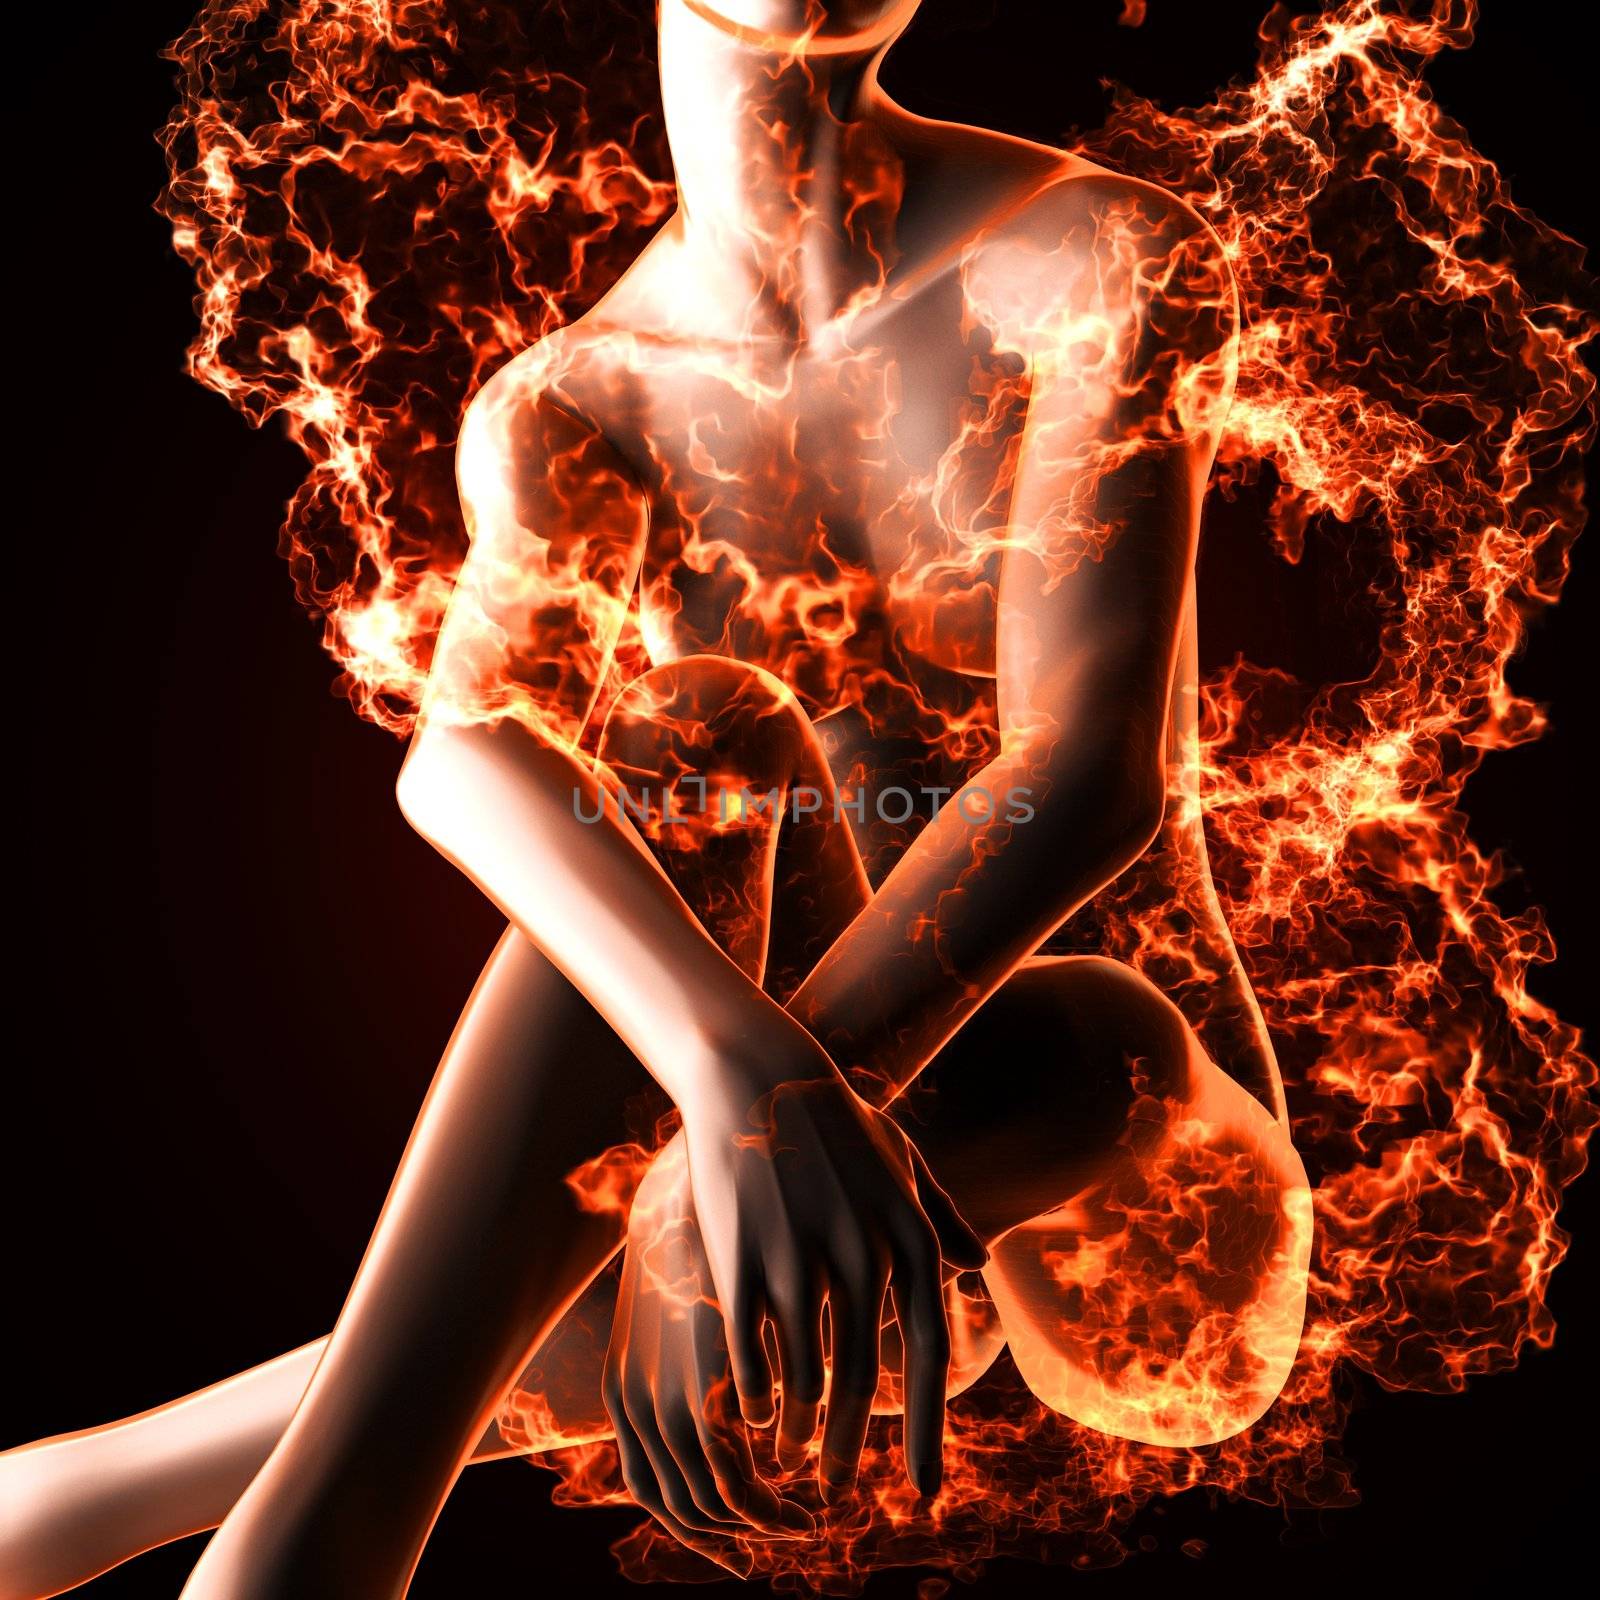 Sexy  woman in fire by videodoctor